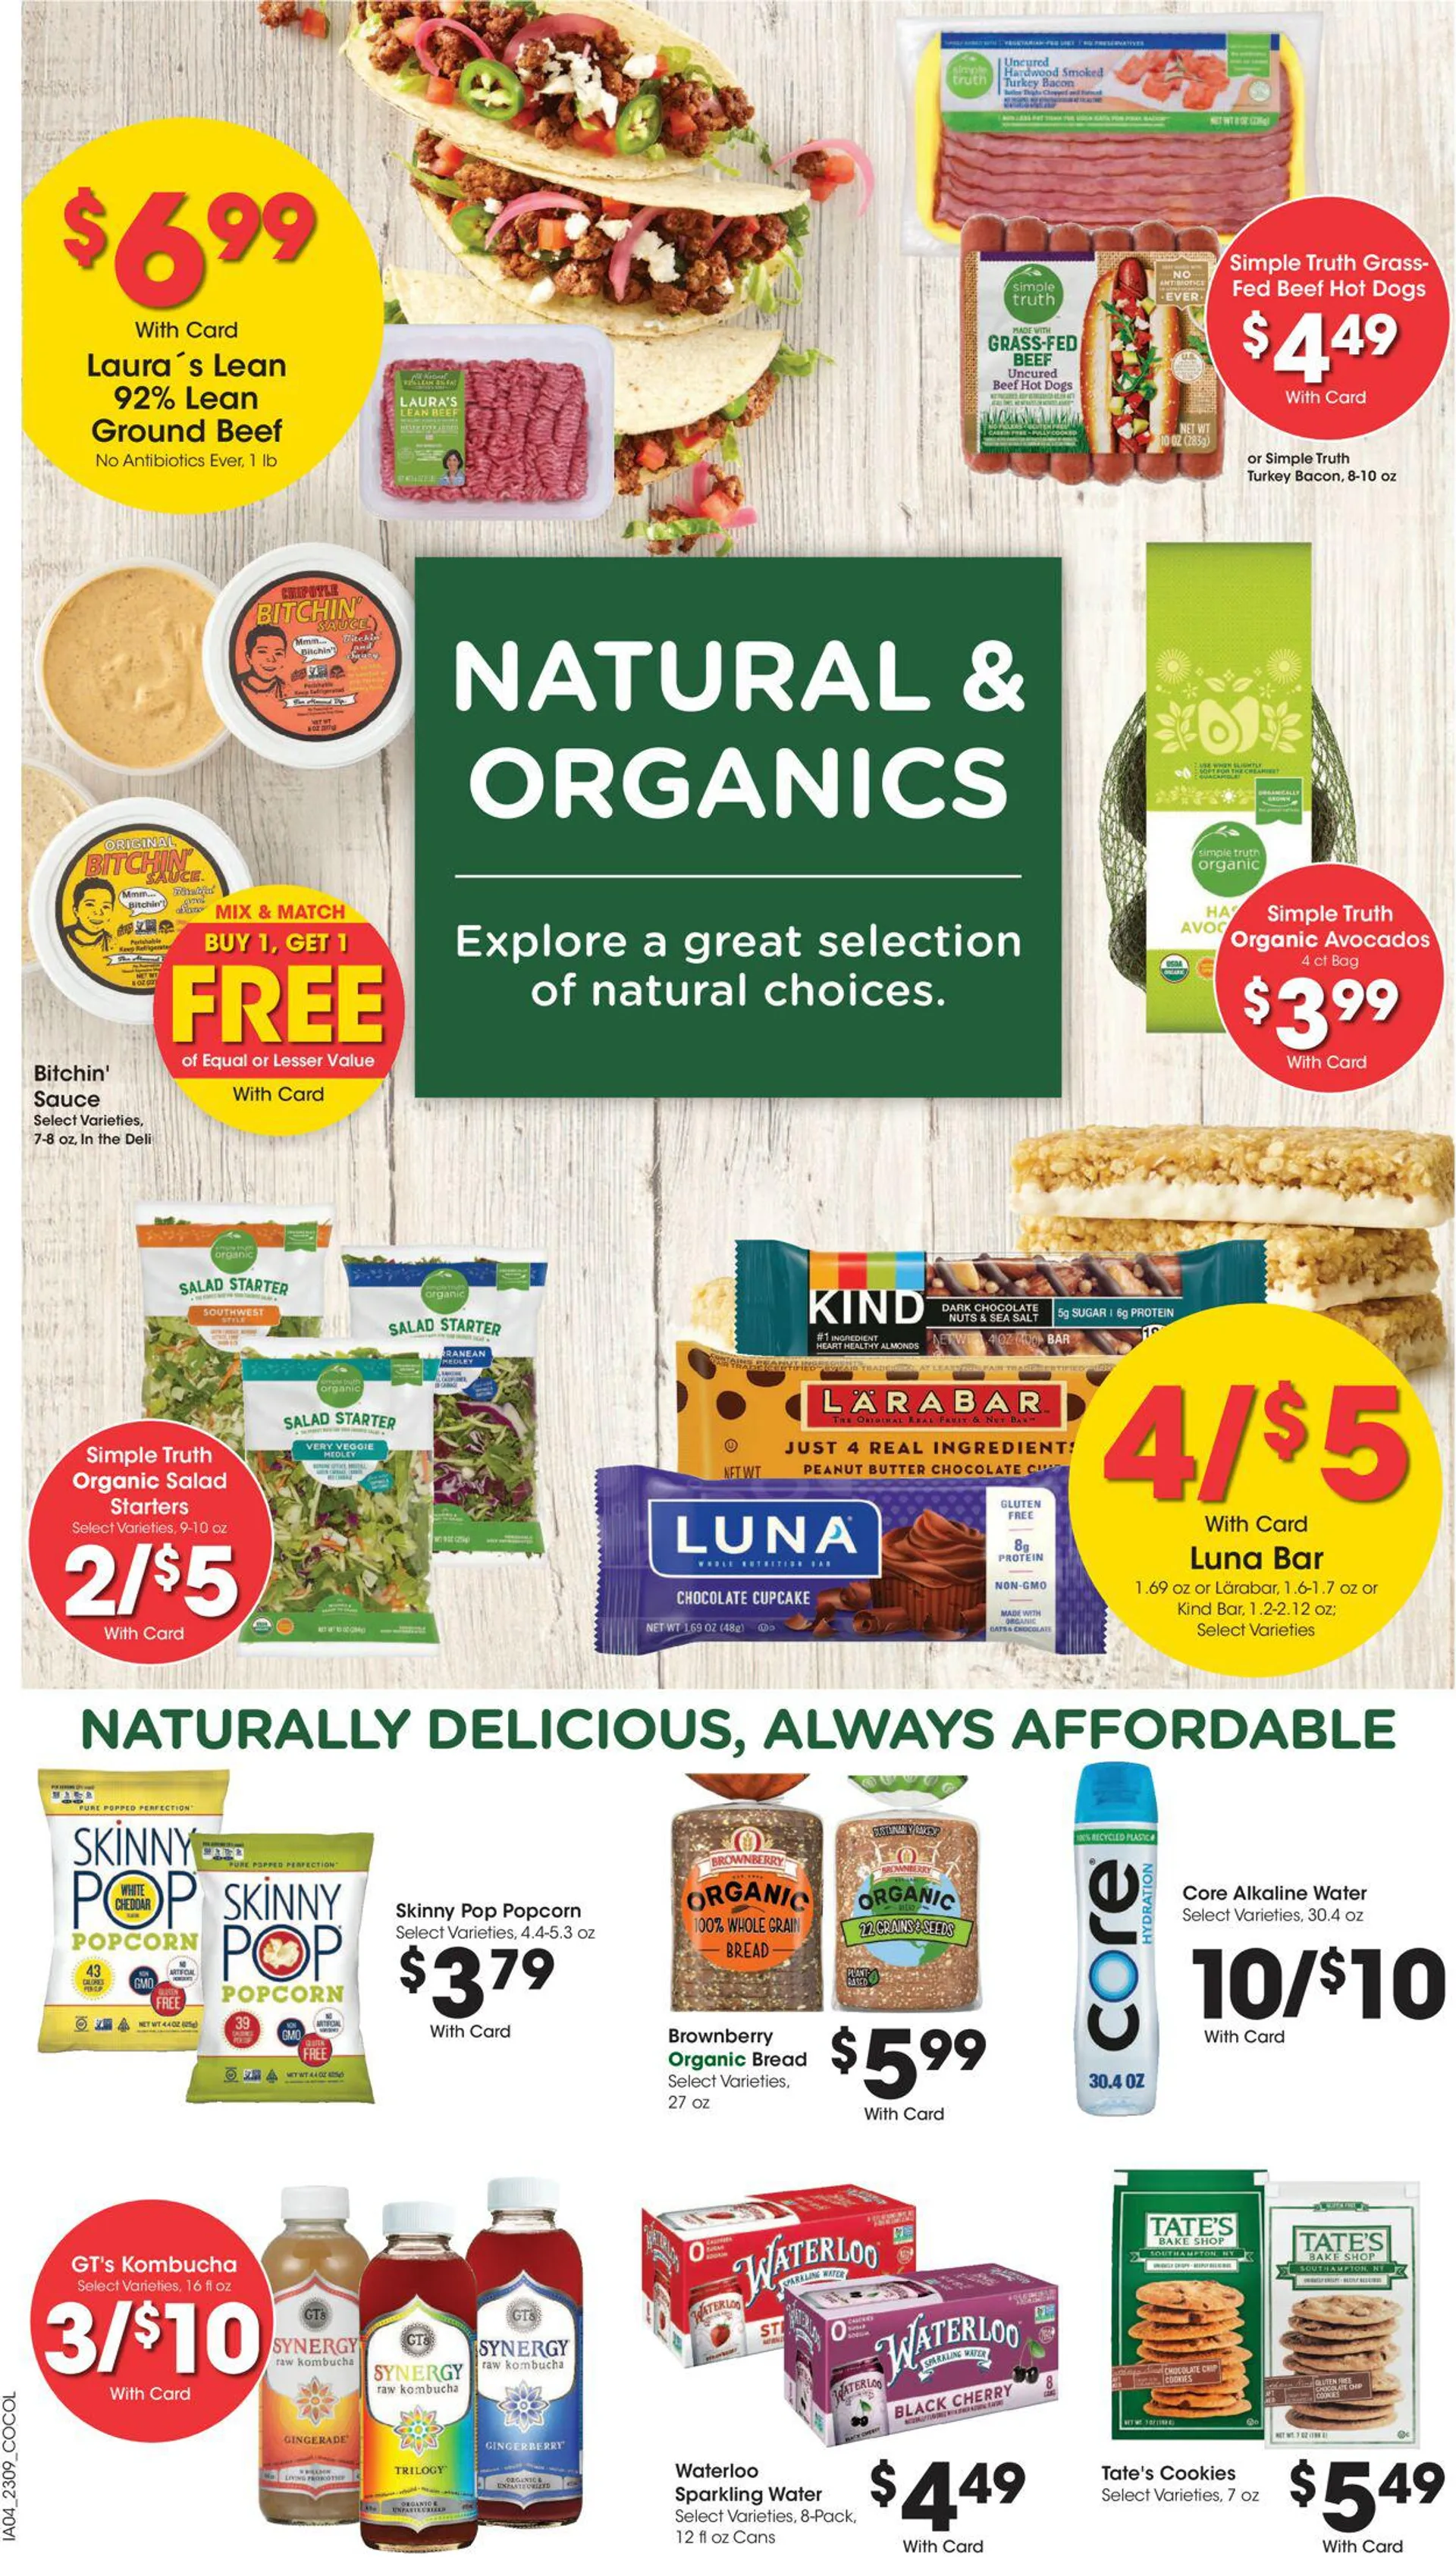 Kroger Current weekly ad - 10